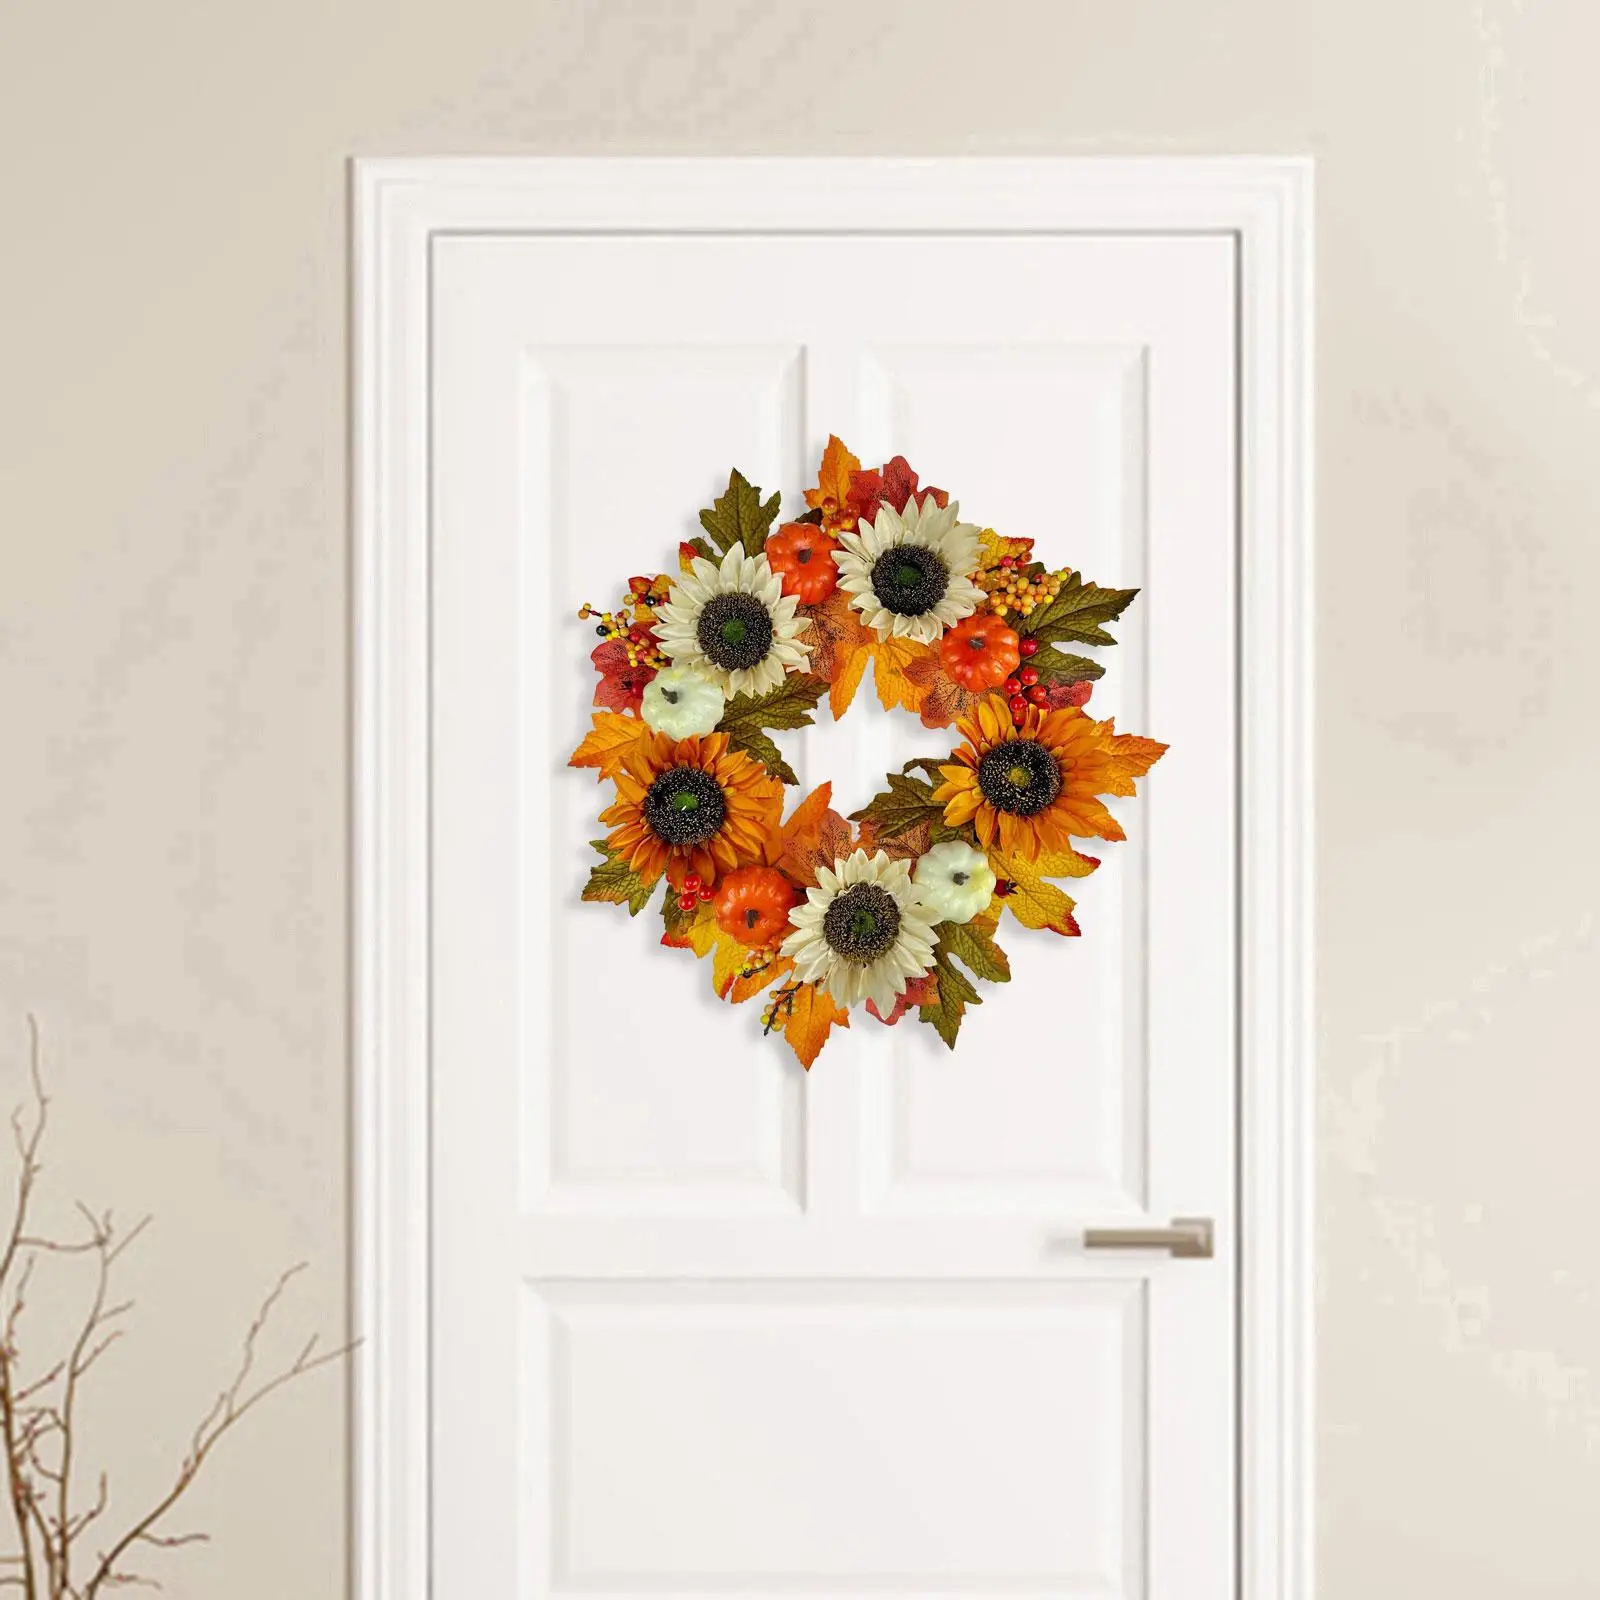 Garland Hanger Berries Maple Leaves 17 inch Fall Decor Wreath for Front Door for Window Fireplace Front Door Fall Holiday